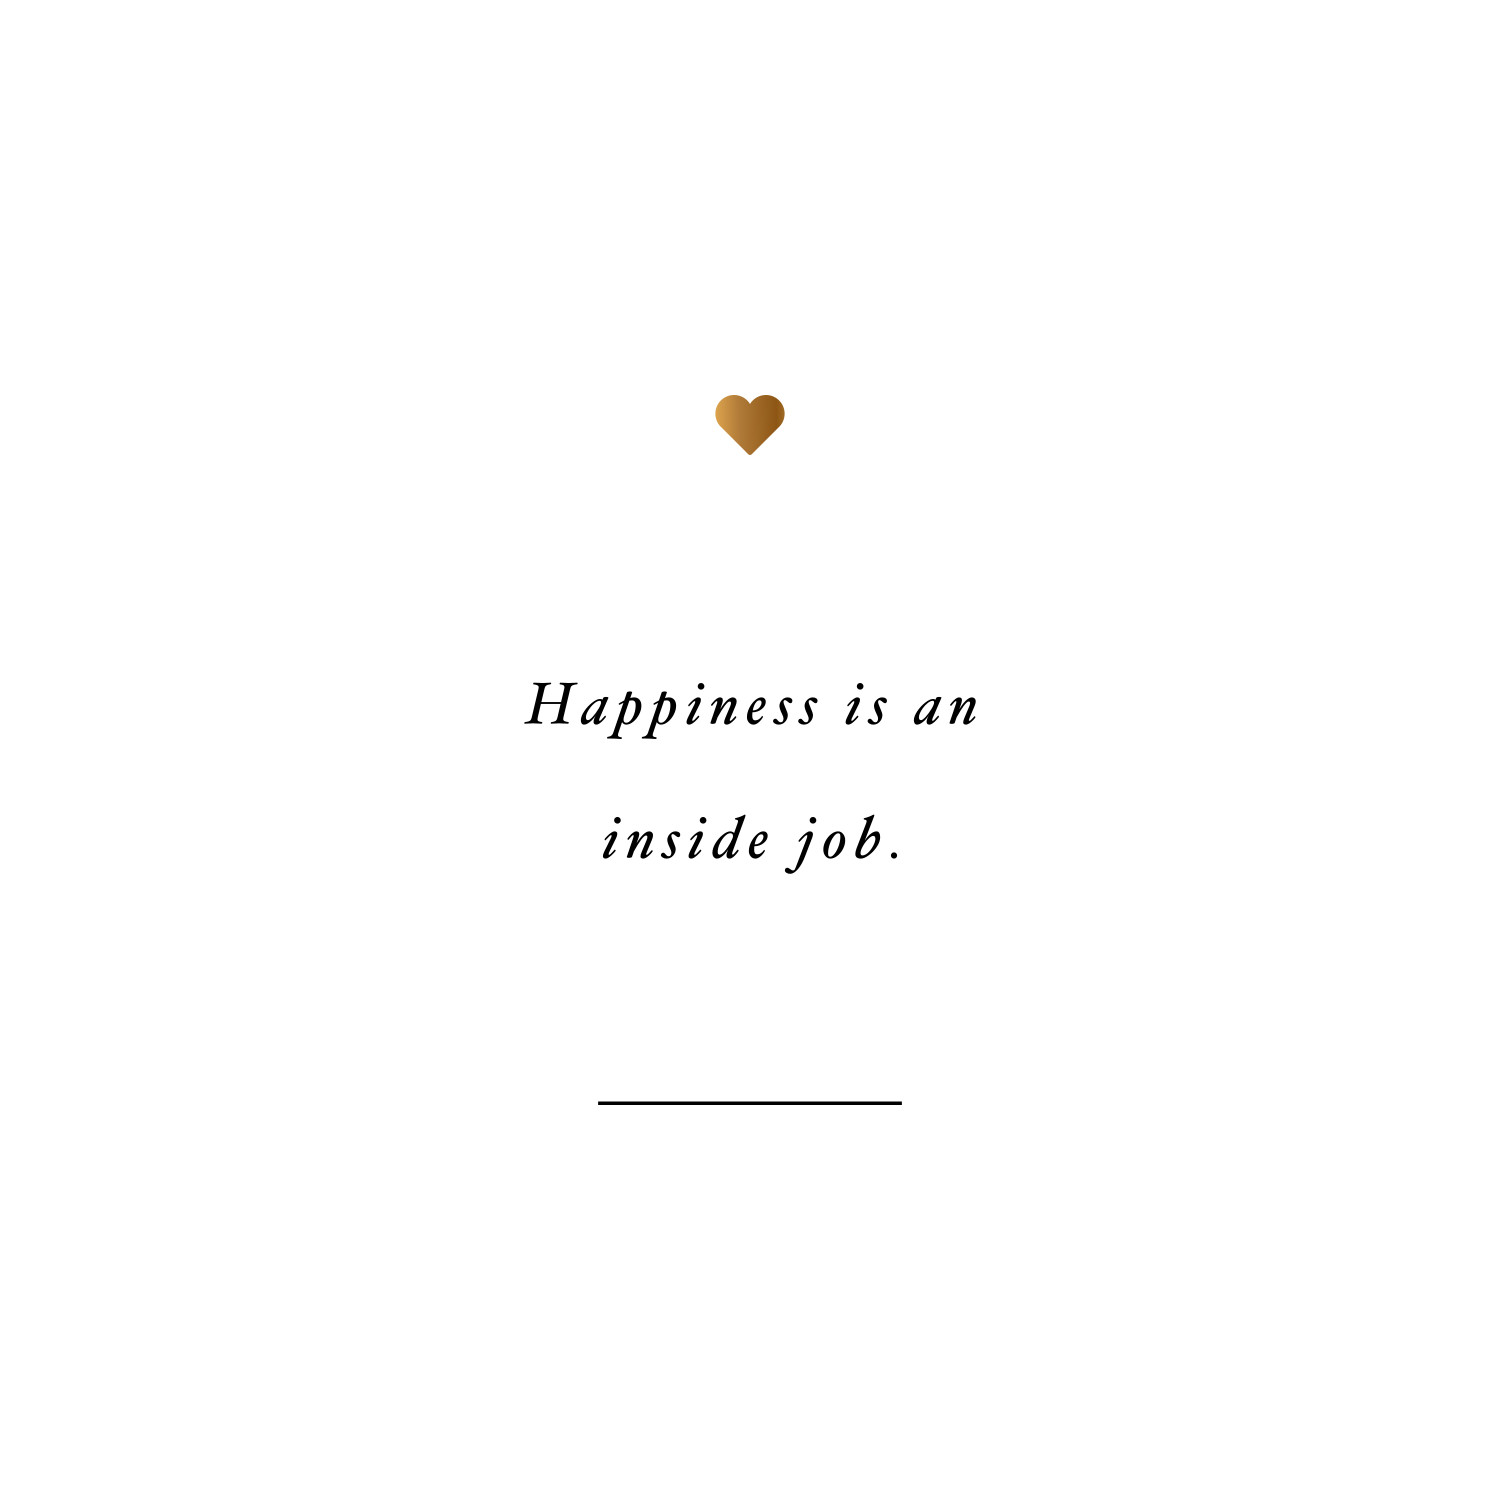 Happiness is an inside job! Browse our collection of inspirational exercise and fitness quotes and get instant weight loss and training motivation. Transform positive thoughts into positive actions and get fit, healthy and happy! https://www.spotebi.com/workout-motivation/happiness-is-an-inside-job/